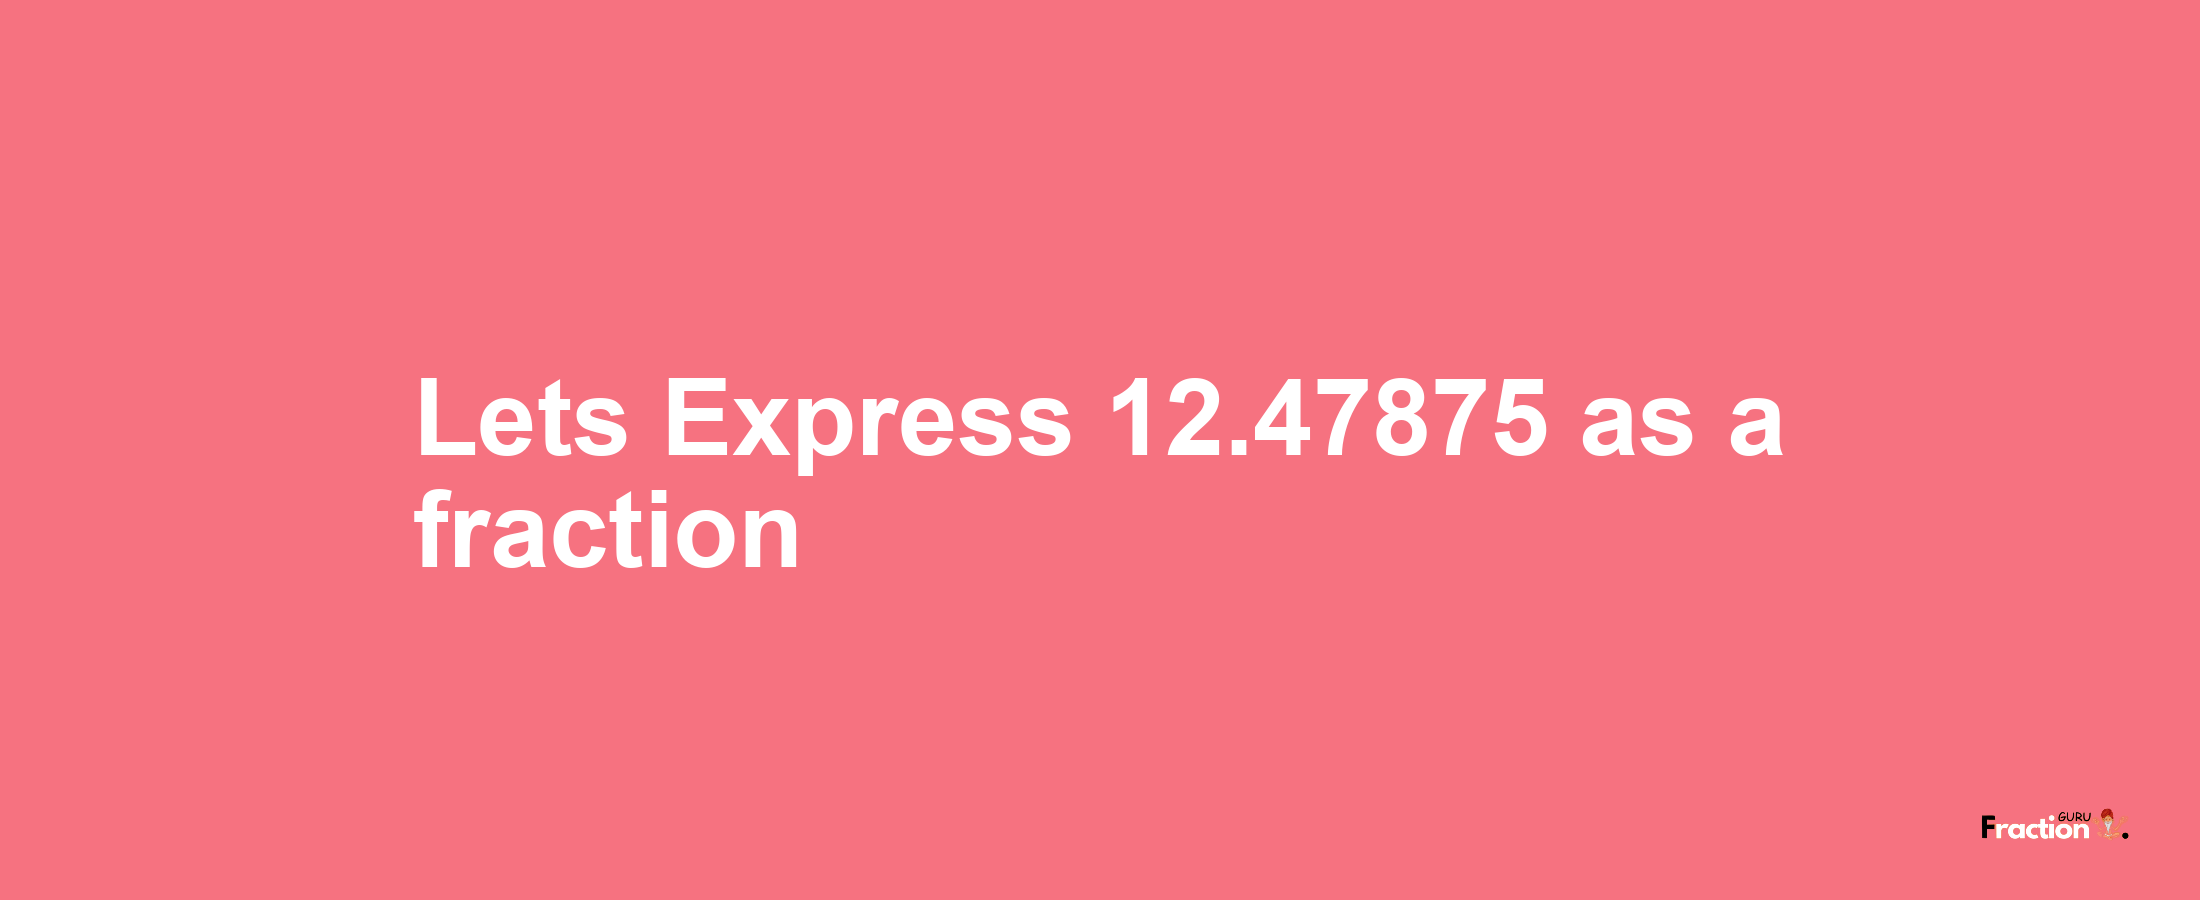 Lets Express 12.47875 as afraction